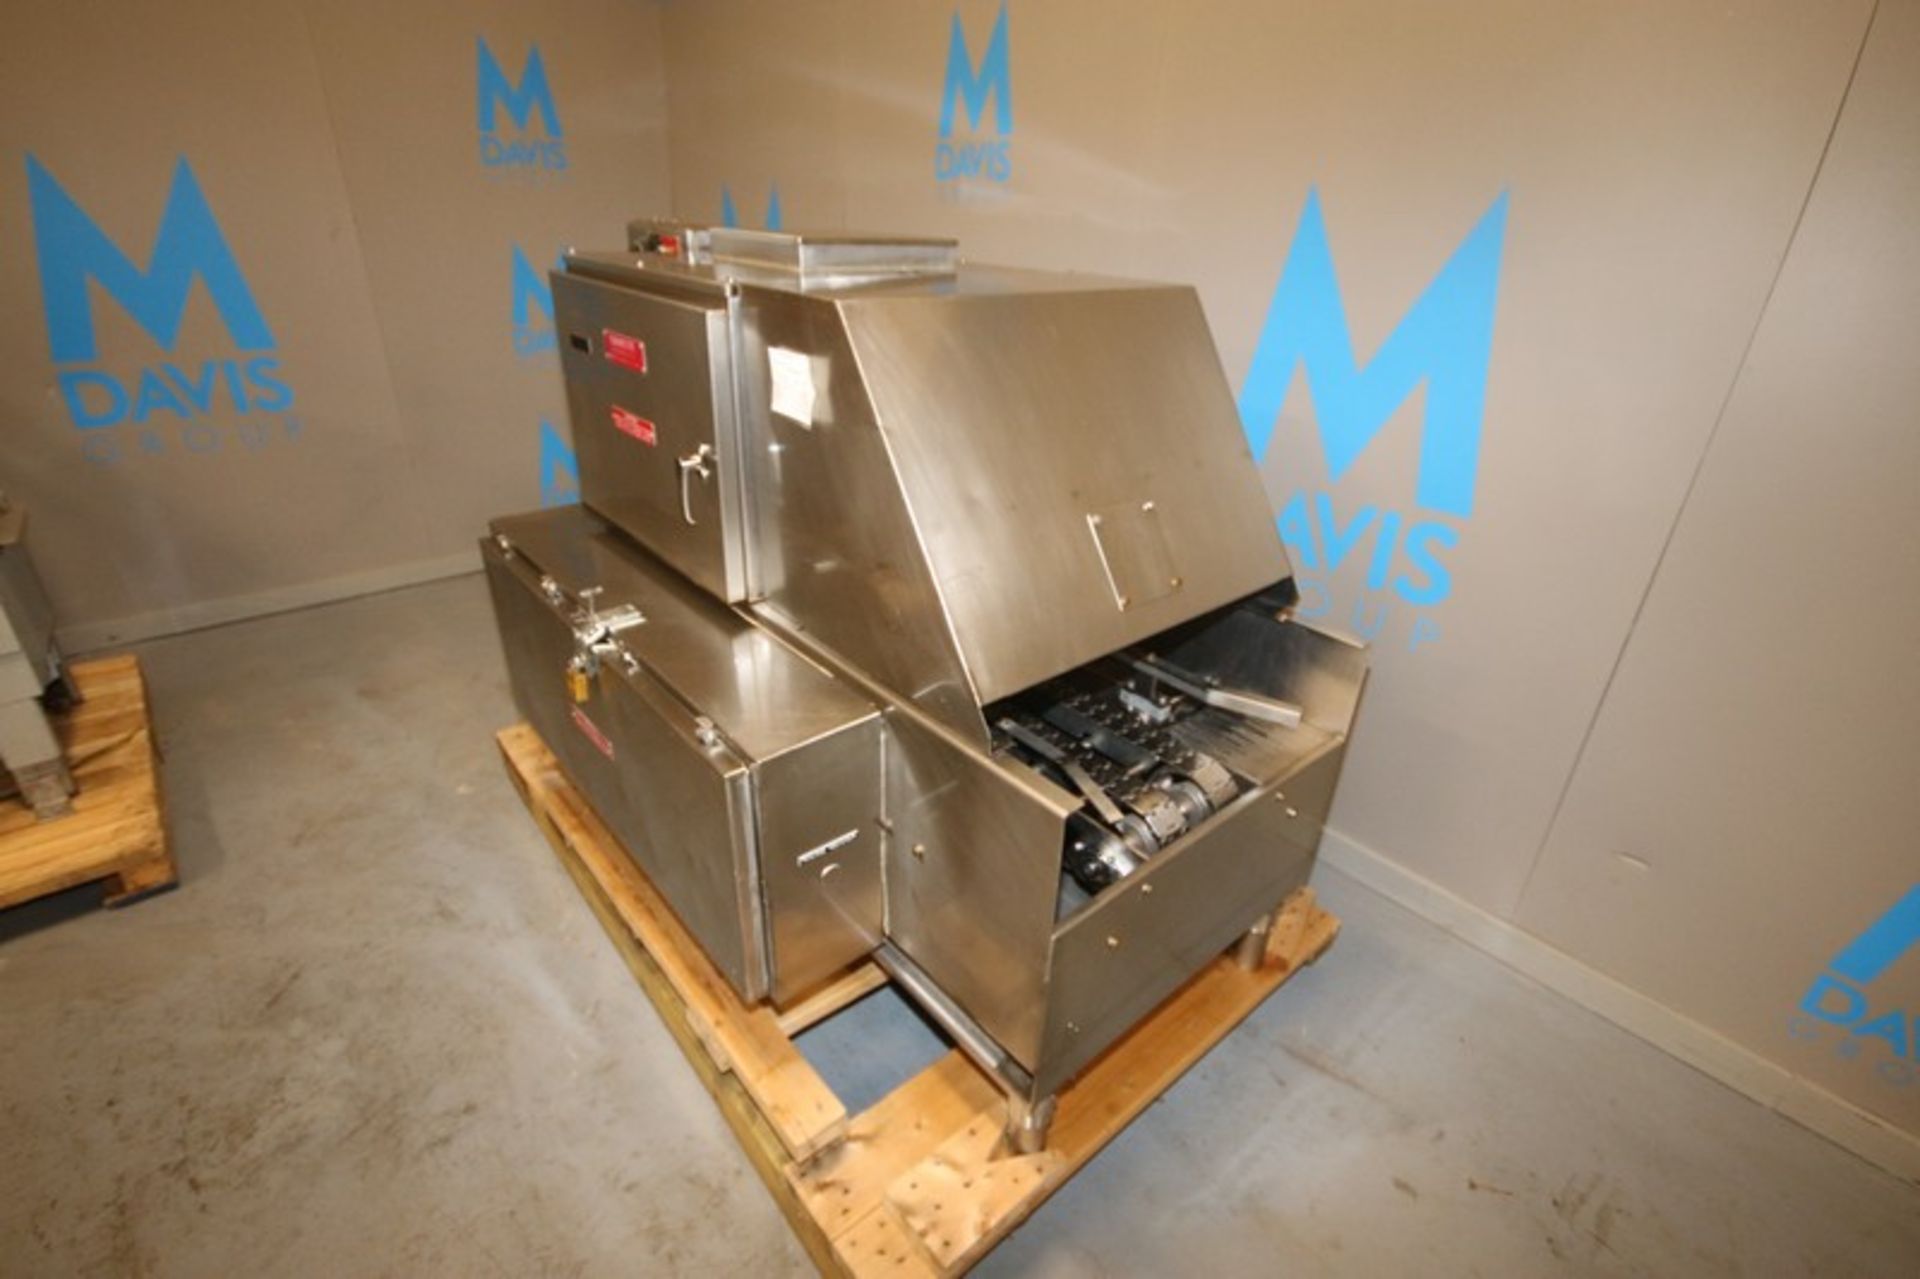 Mallet S/S Bread Pan Oiler,M/N 2001A, S/N 243-456, 460 Volts, 3 Phase, with Casters (INV#77729)( - Image 11 of 11